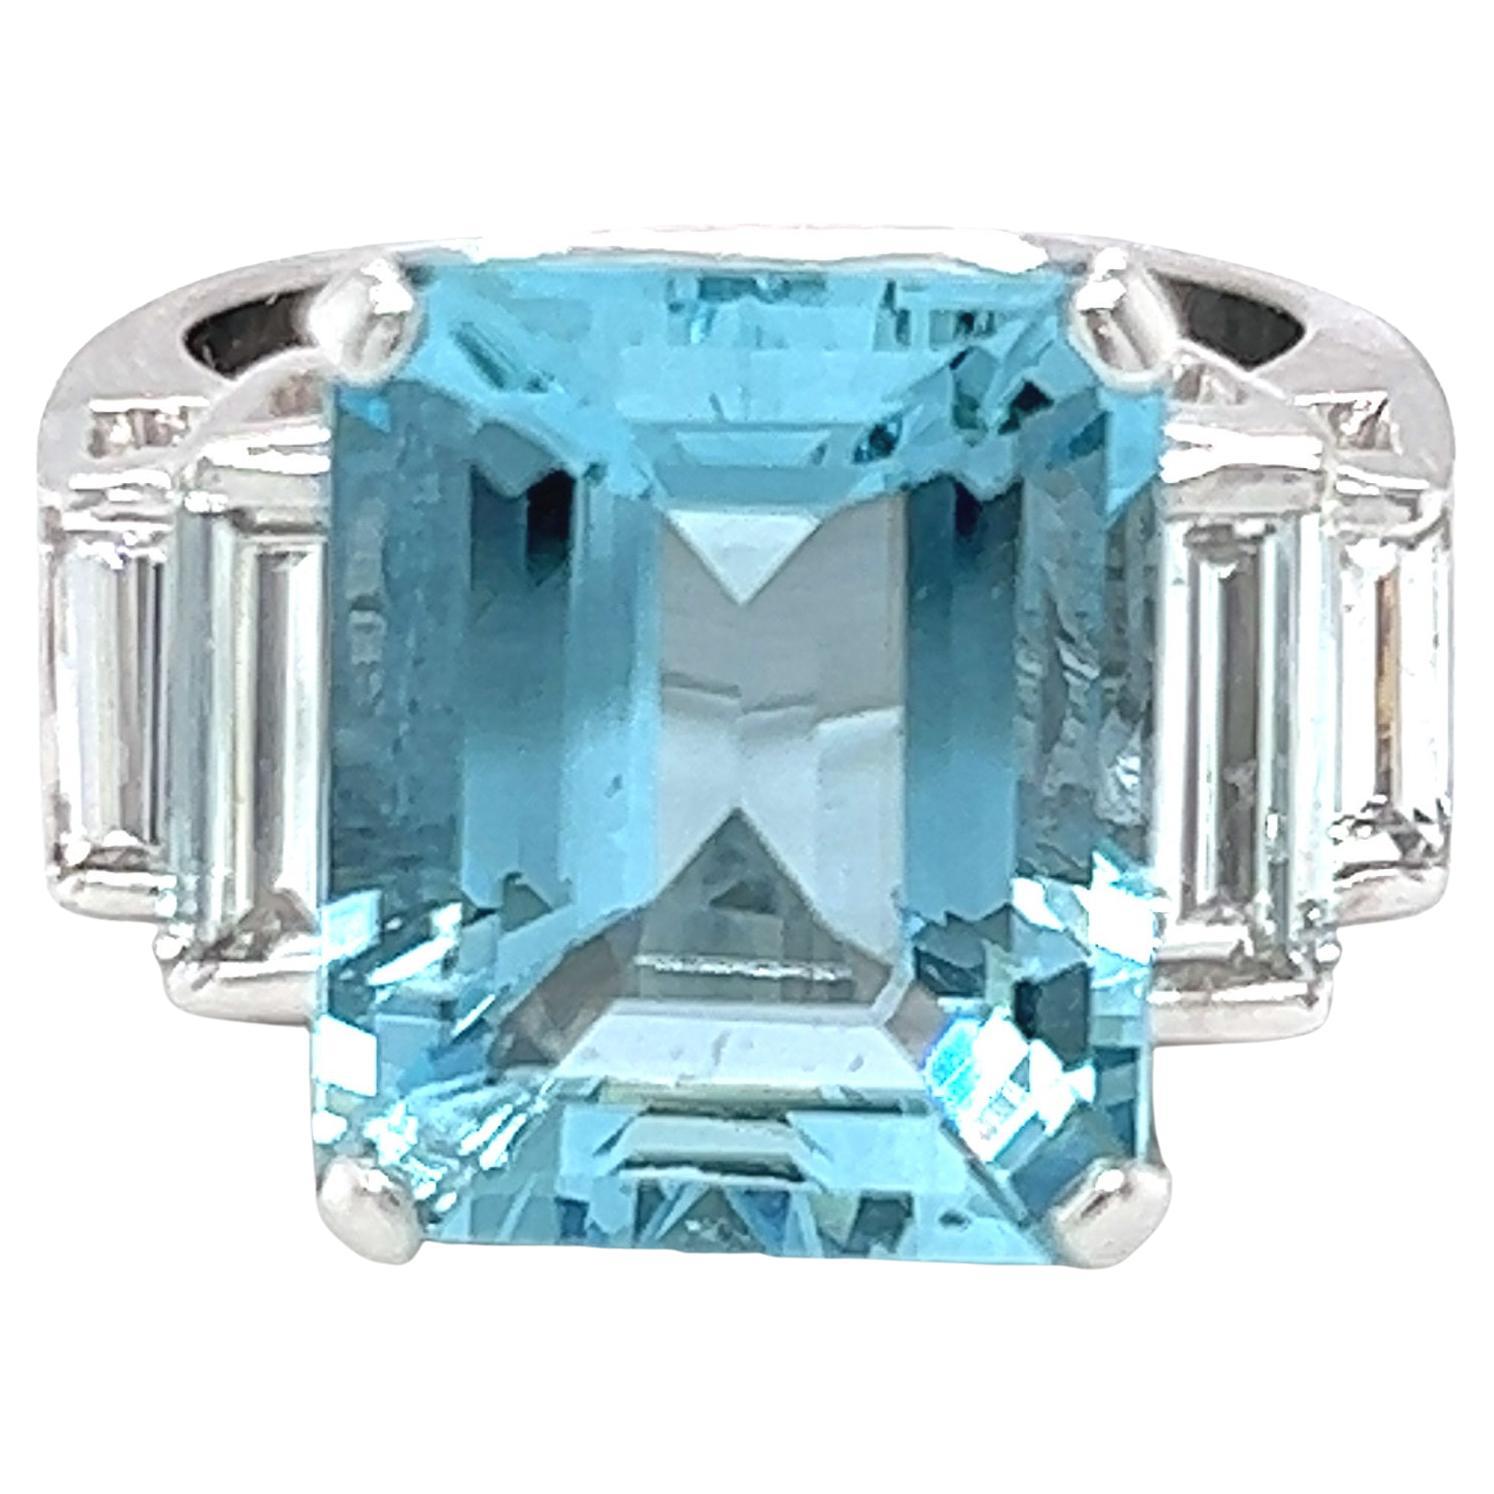 14 karat white gold ring featuring an emerald cut aquamarine with exceptional clarity and hue, complemented by baguette cut diamonds that are F-G color, VS clarity. The aquamarine weighs approximately 8.50 carats and baguettes are 0.50 carats total.